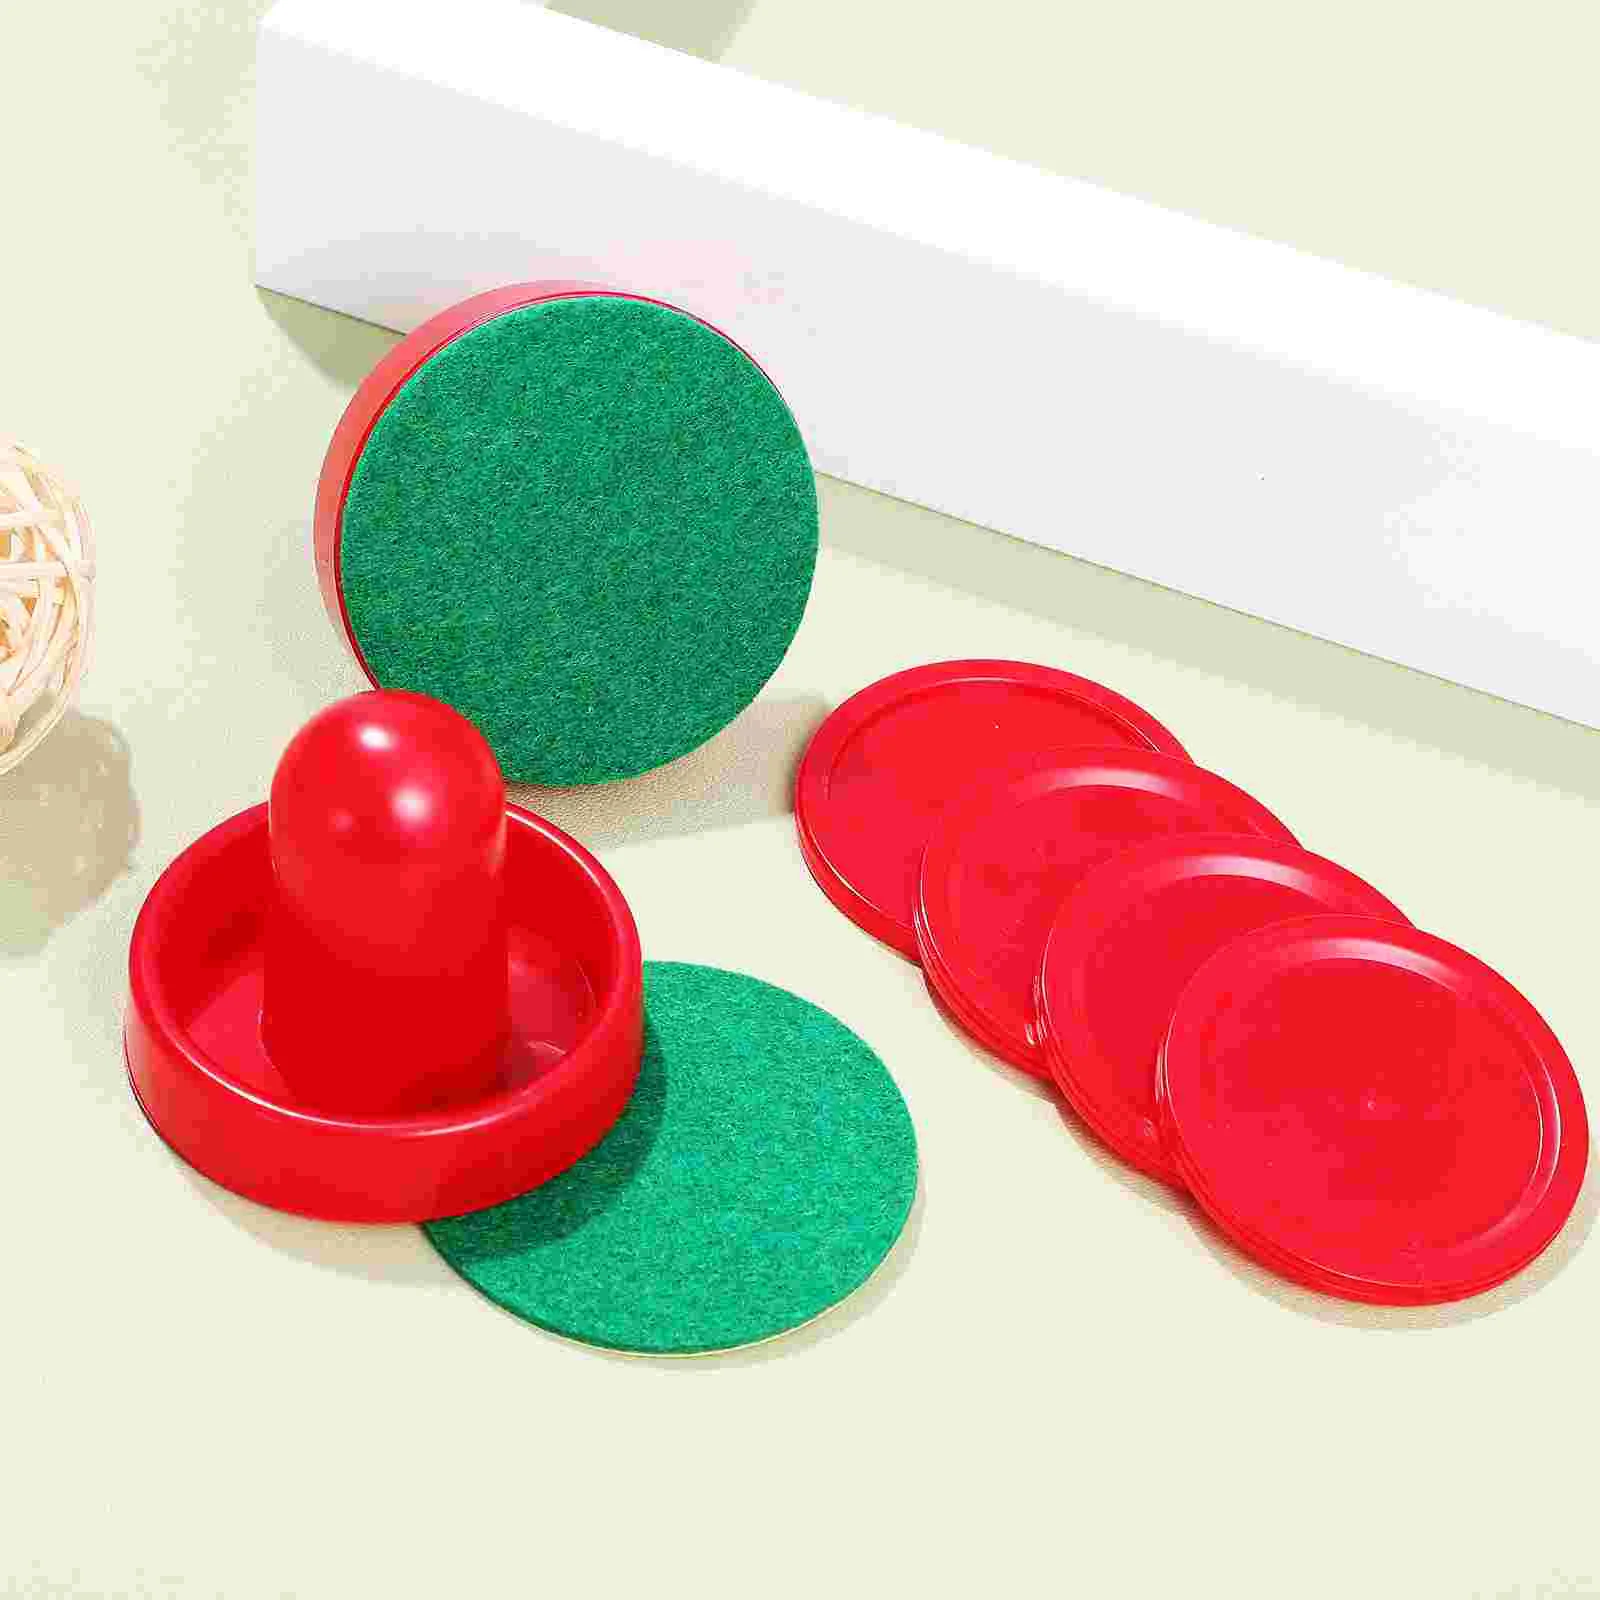 1 Set of Ice Hockey Replacement Pucks Paddles Slider Pushers with Pads for Tables Game Accessories